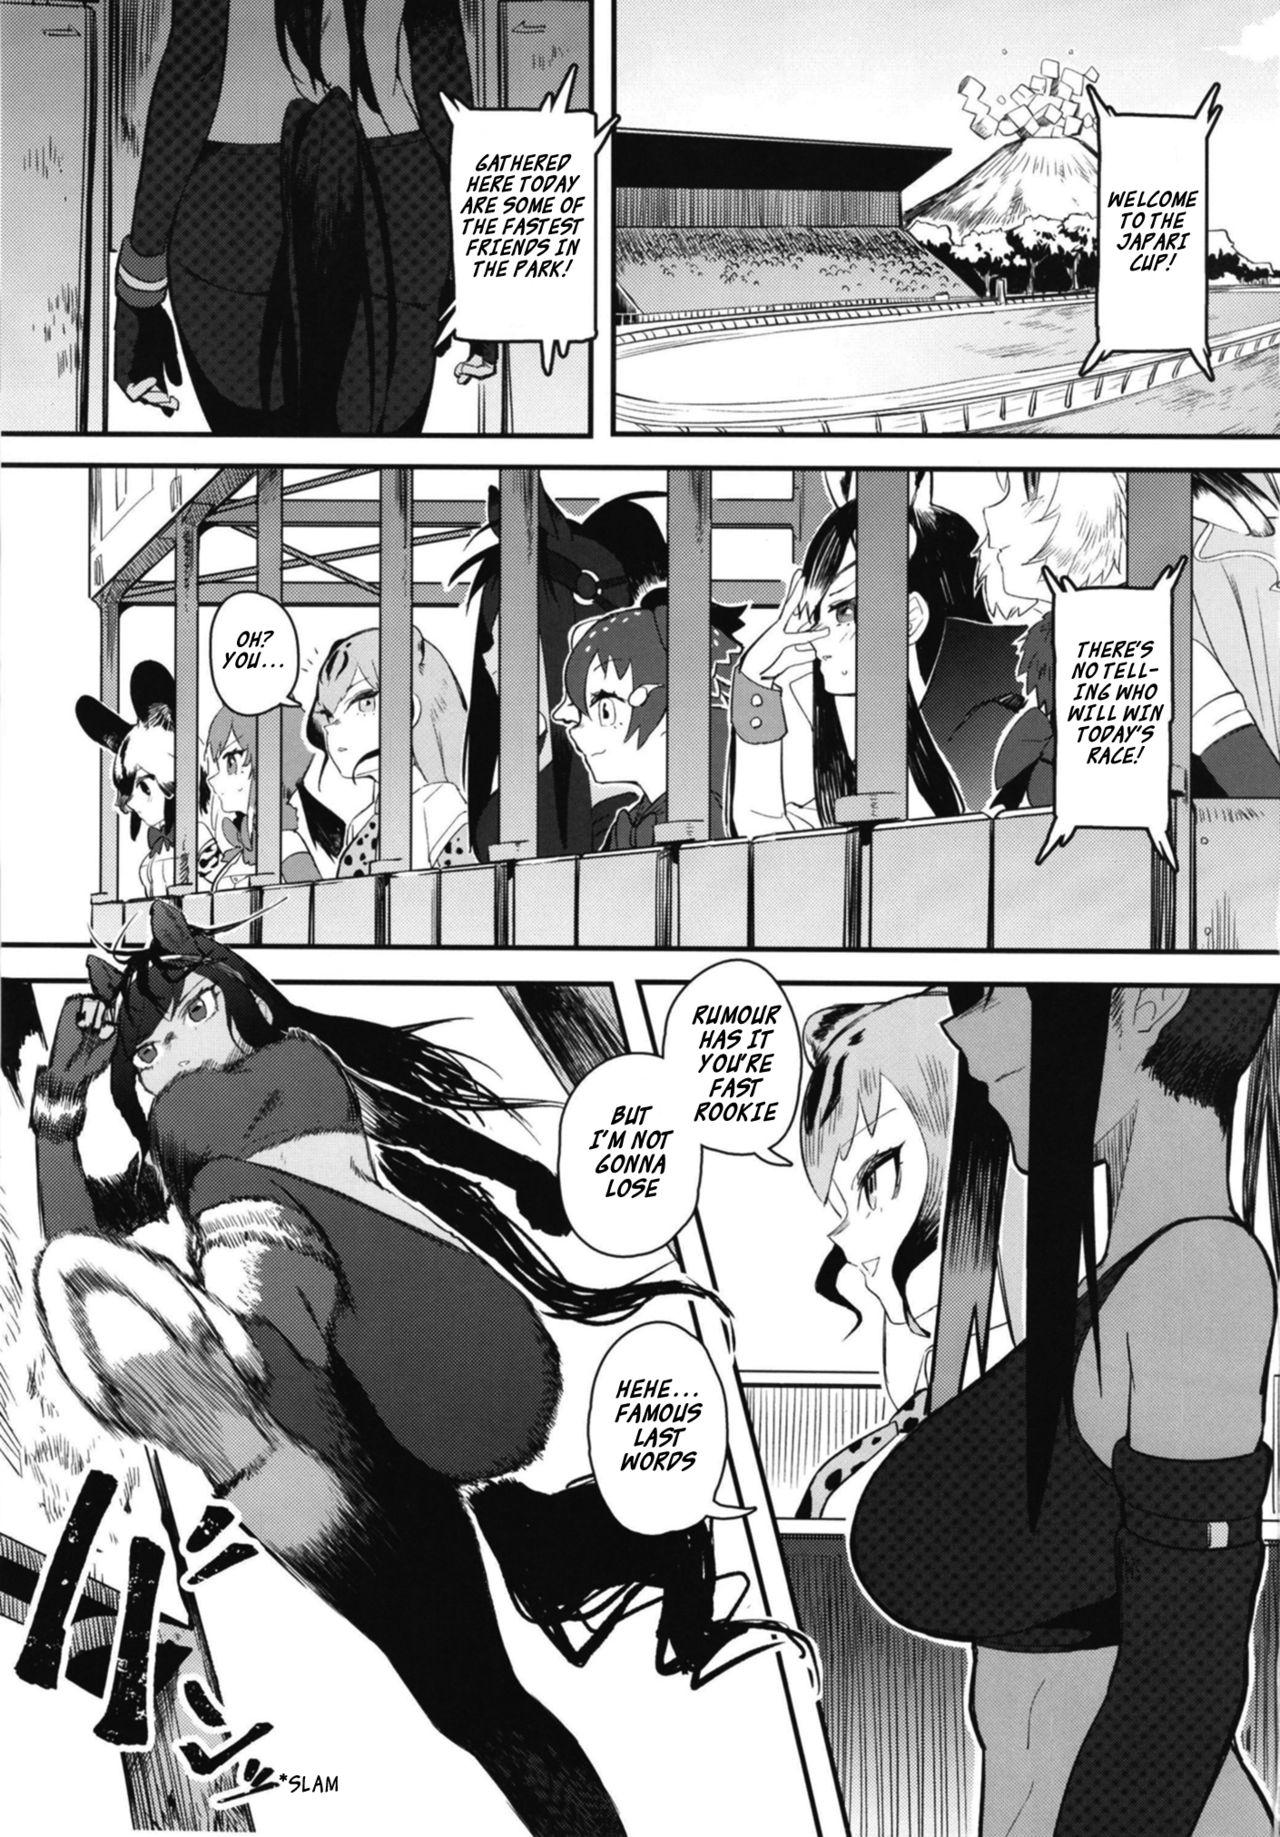 Home Thoroughbred Early Days 2 - Kemono friends Pussy Orgasm - Page 3